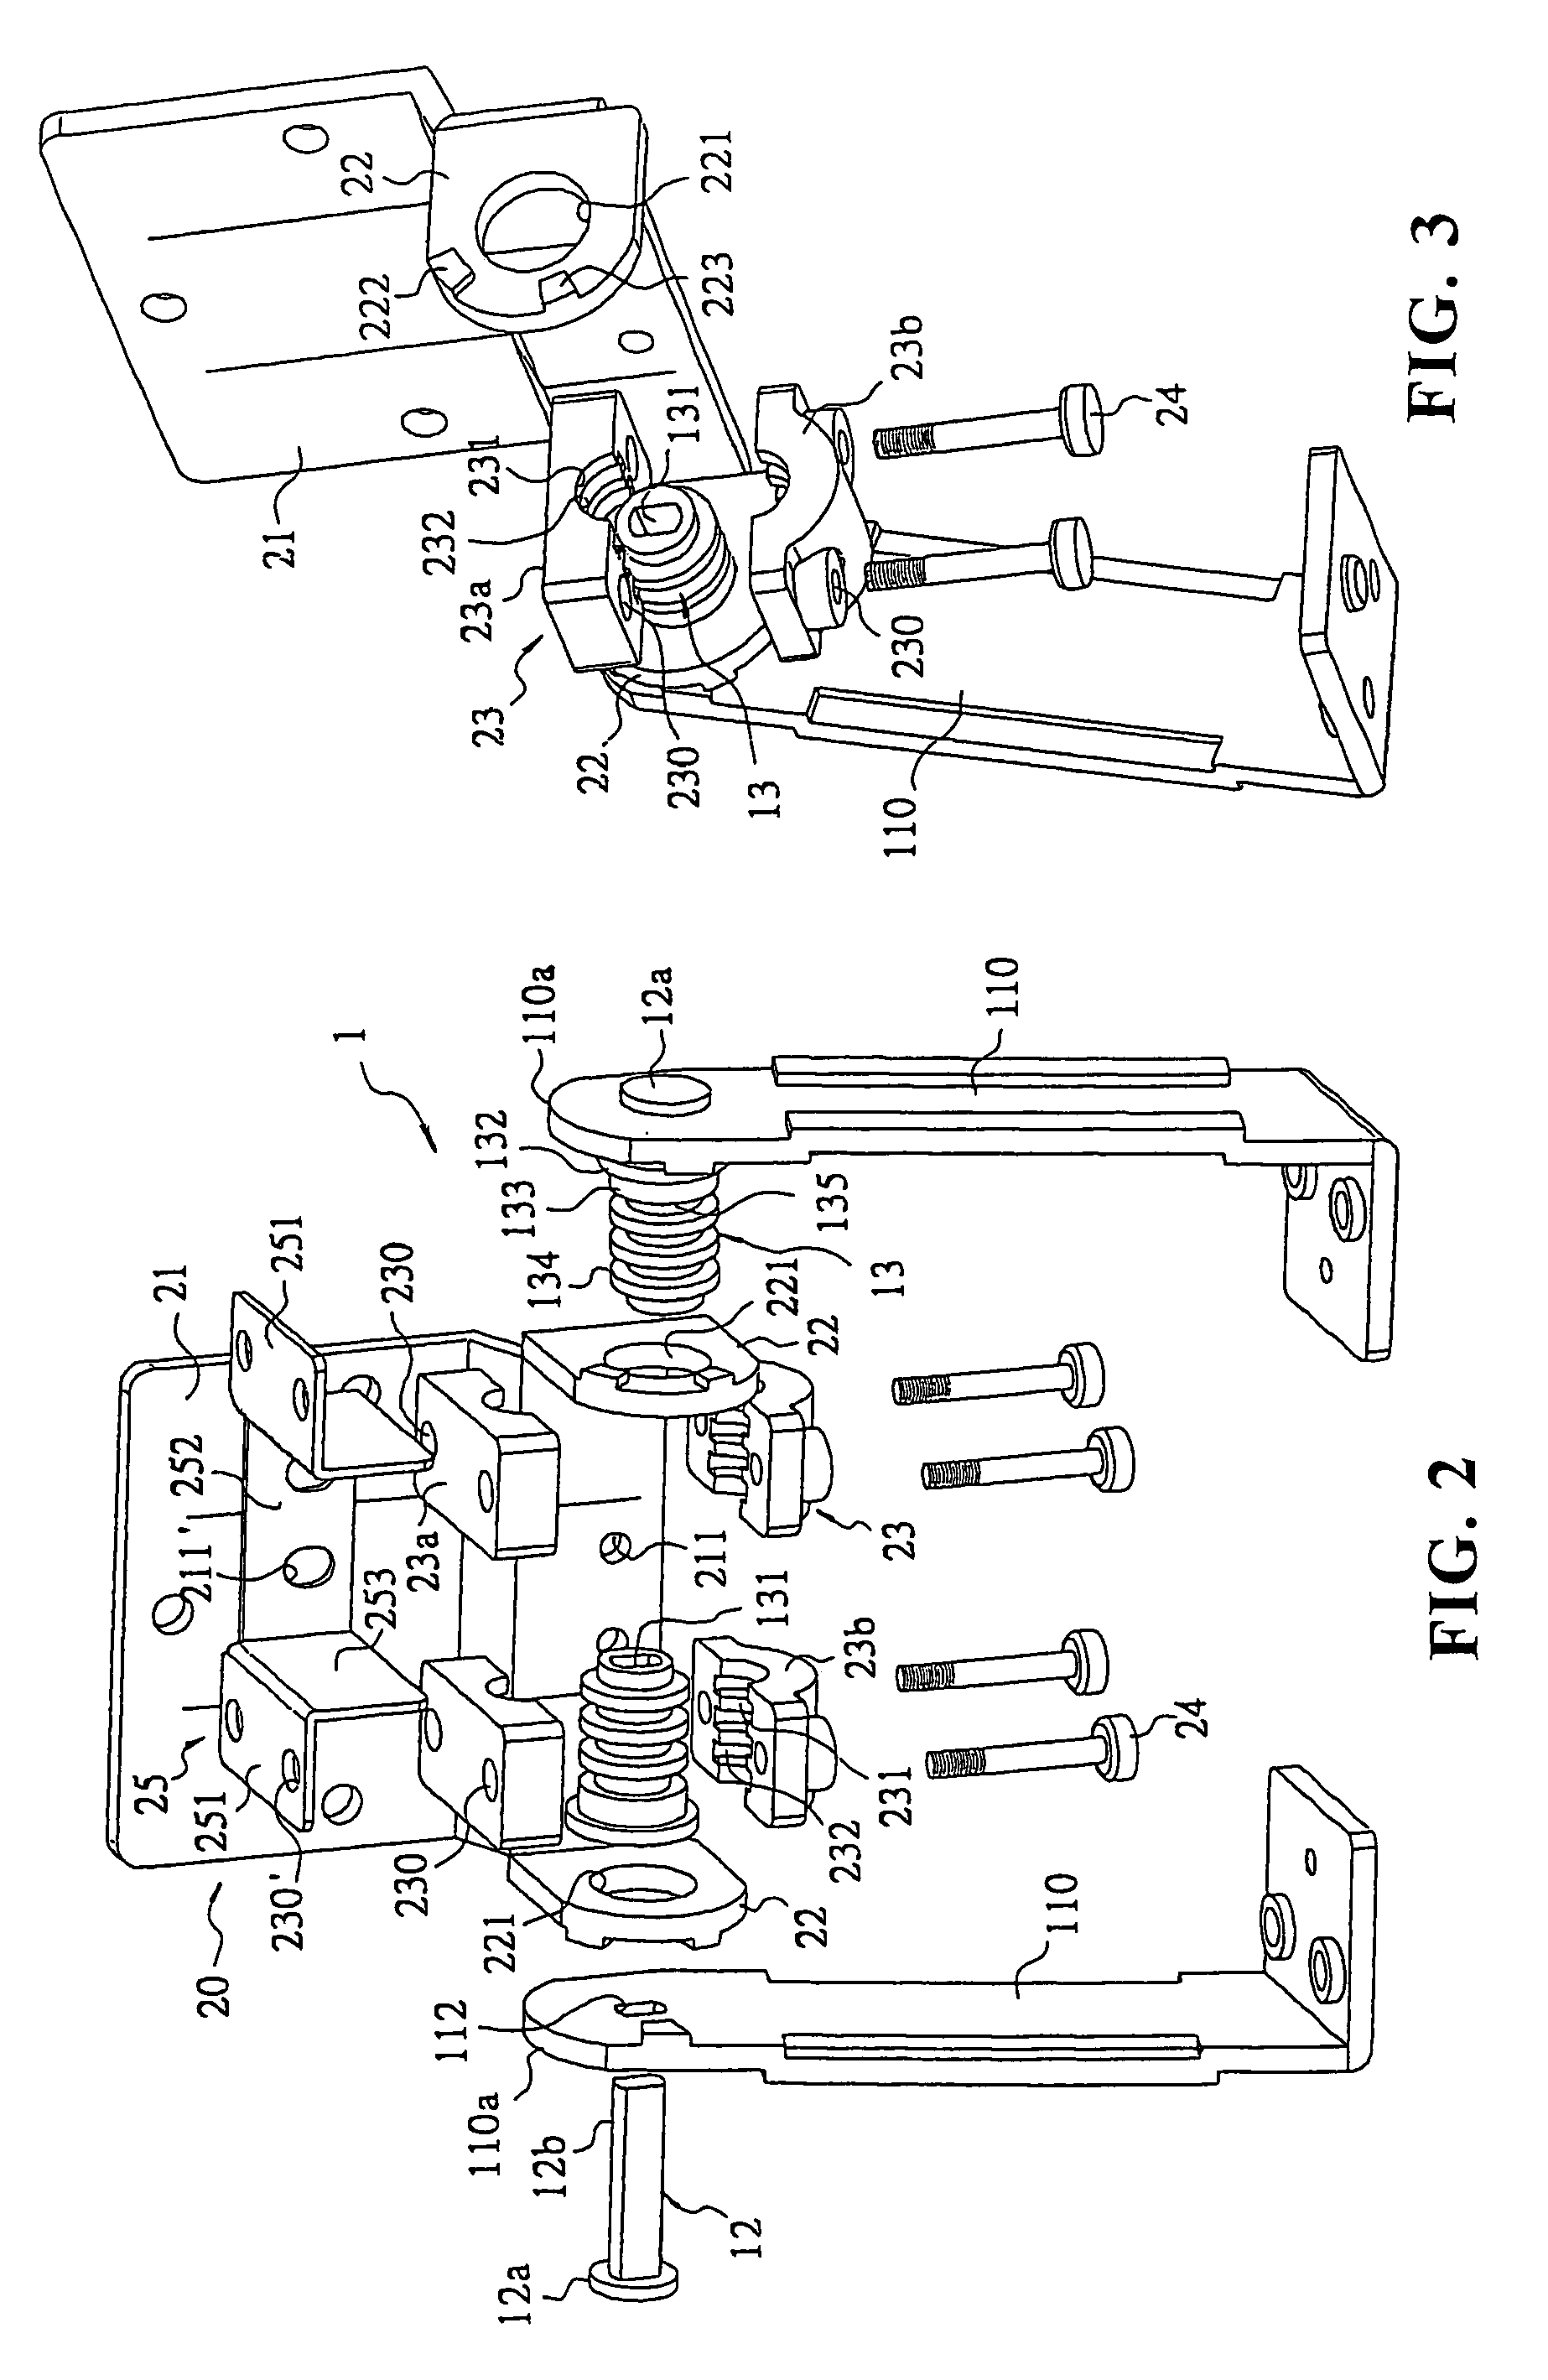 Hinge device for a flat panel display